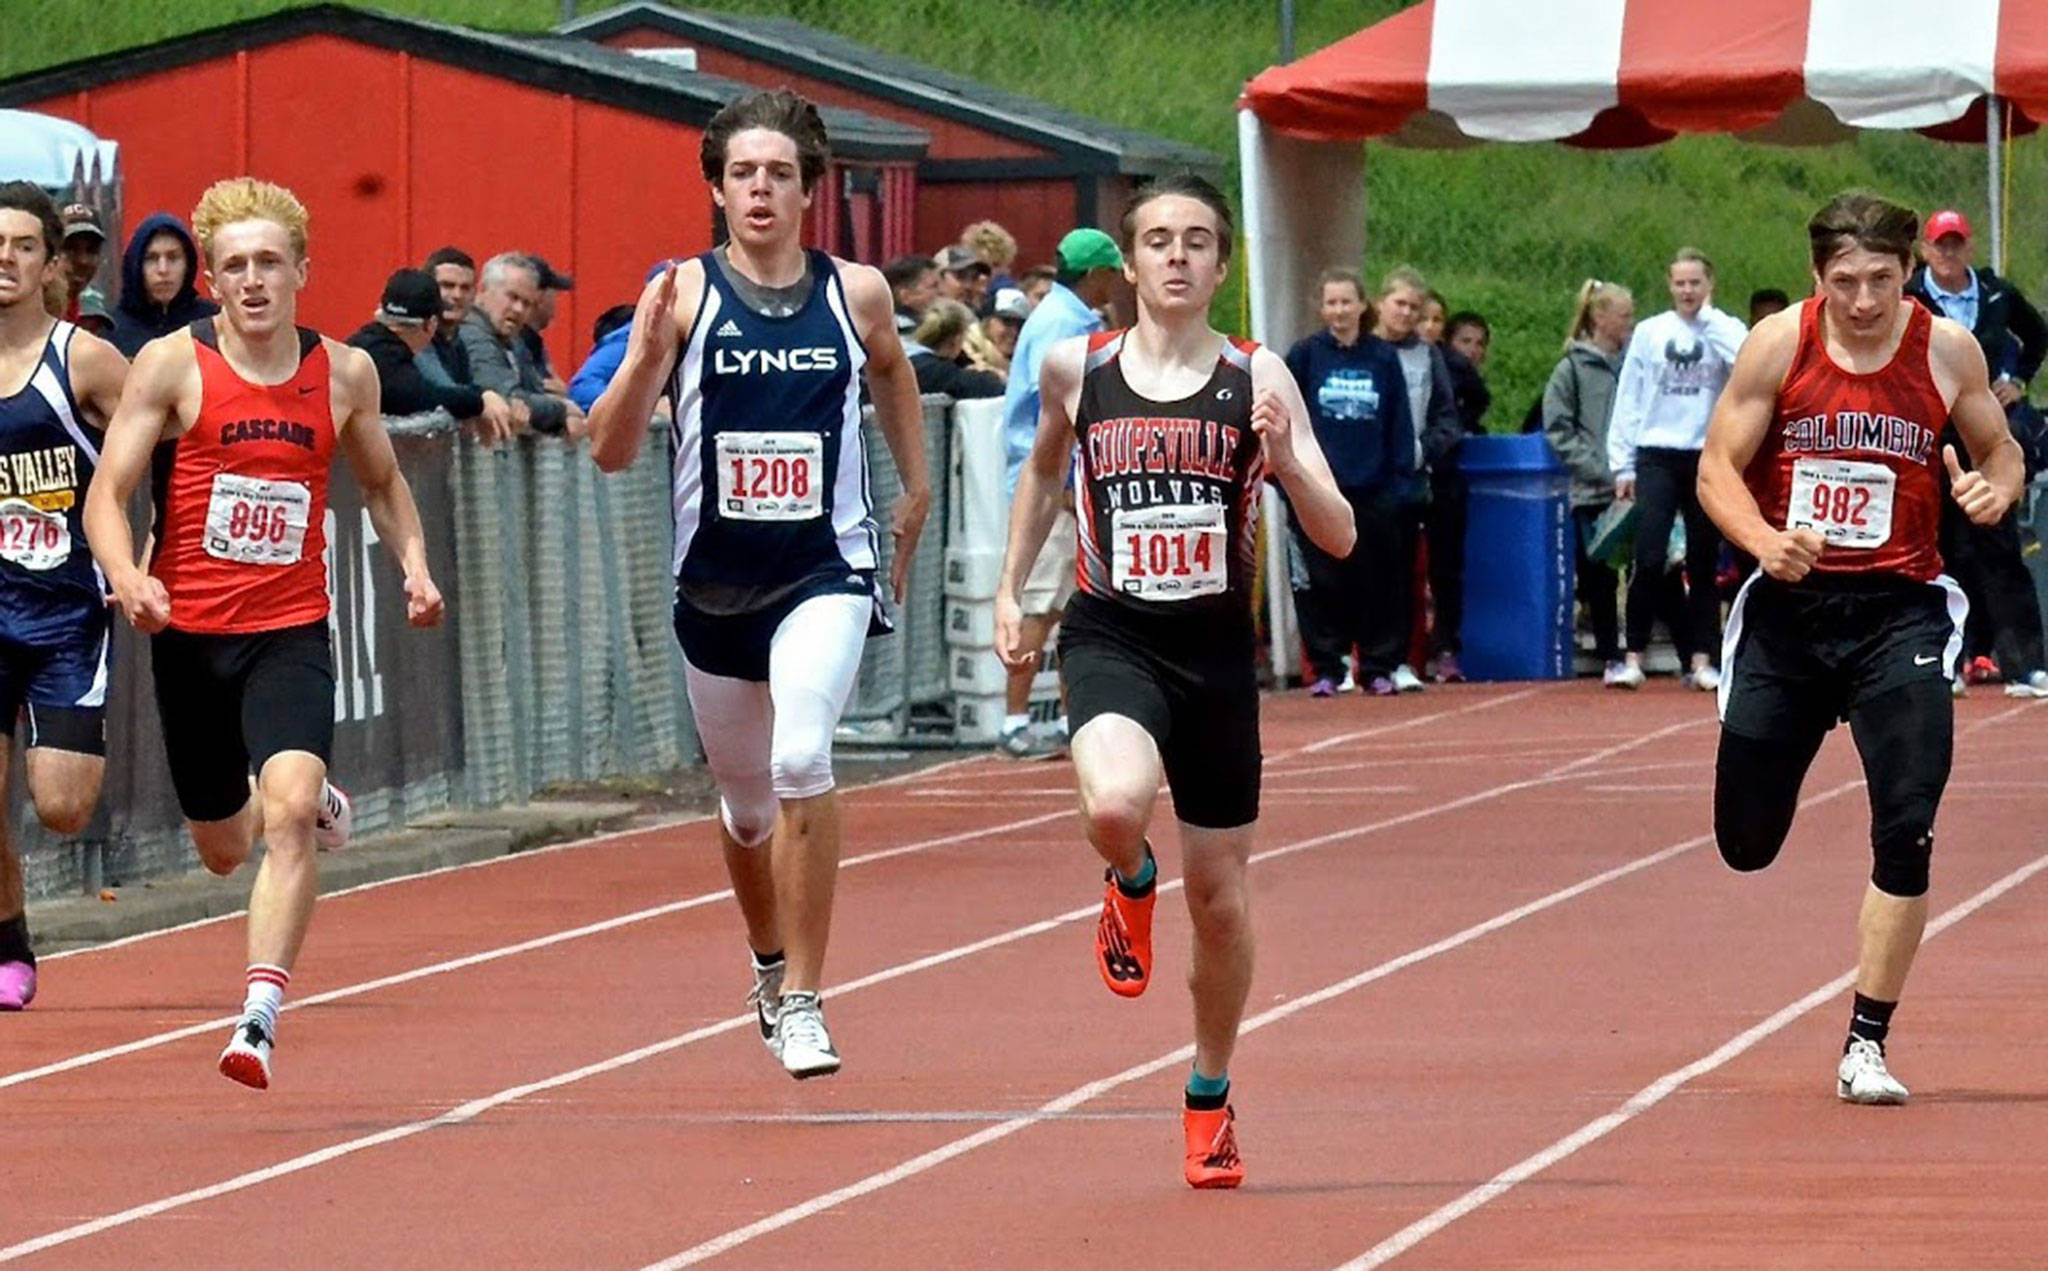 Coupeville’s Danny Conlisk, second from right, runs to first place and a school record in the 400 meters. (Photo by Karen Swegler)